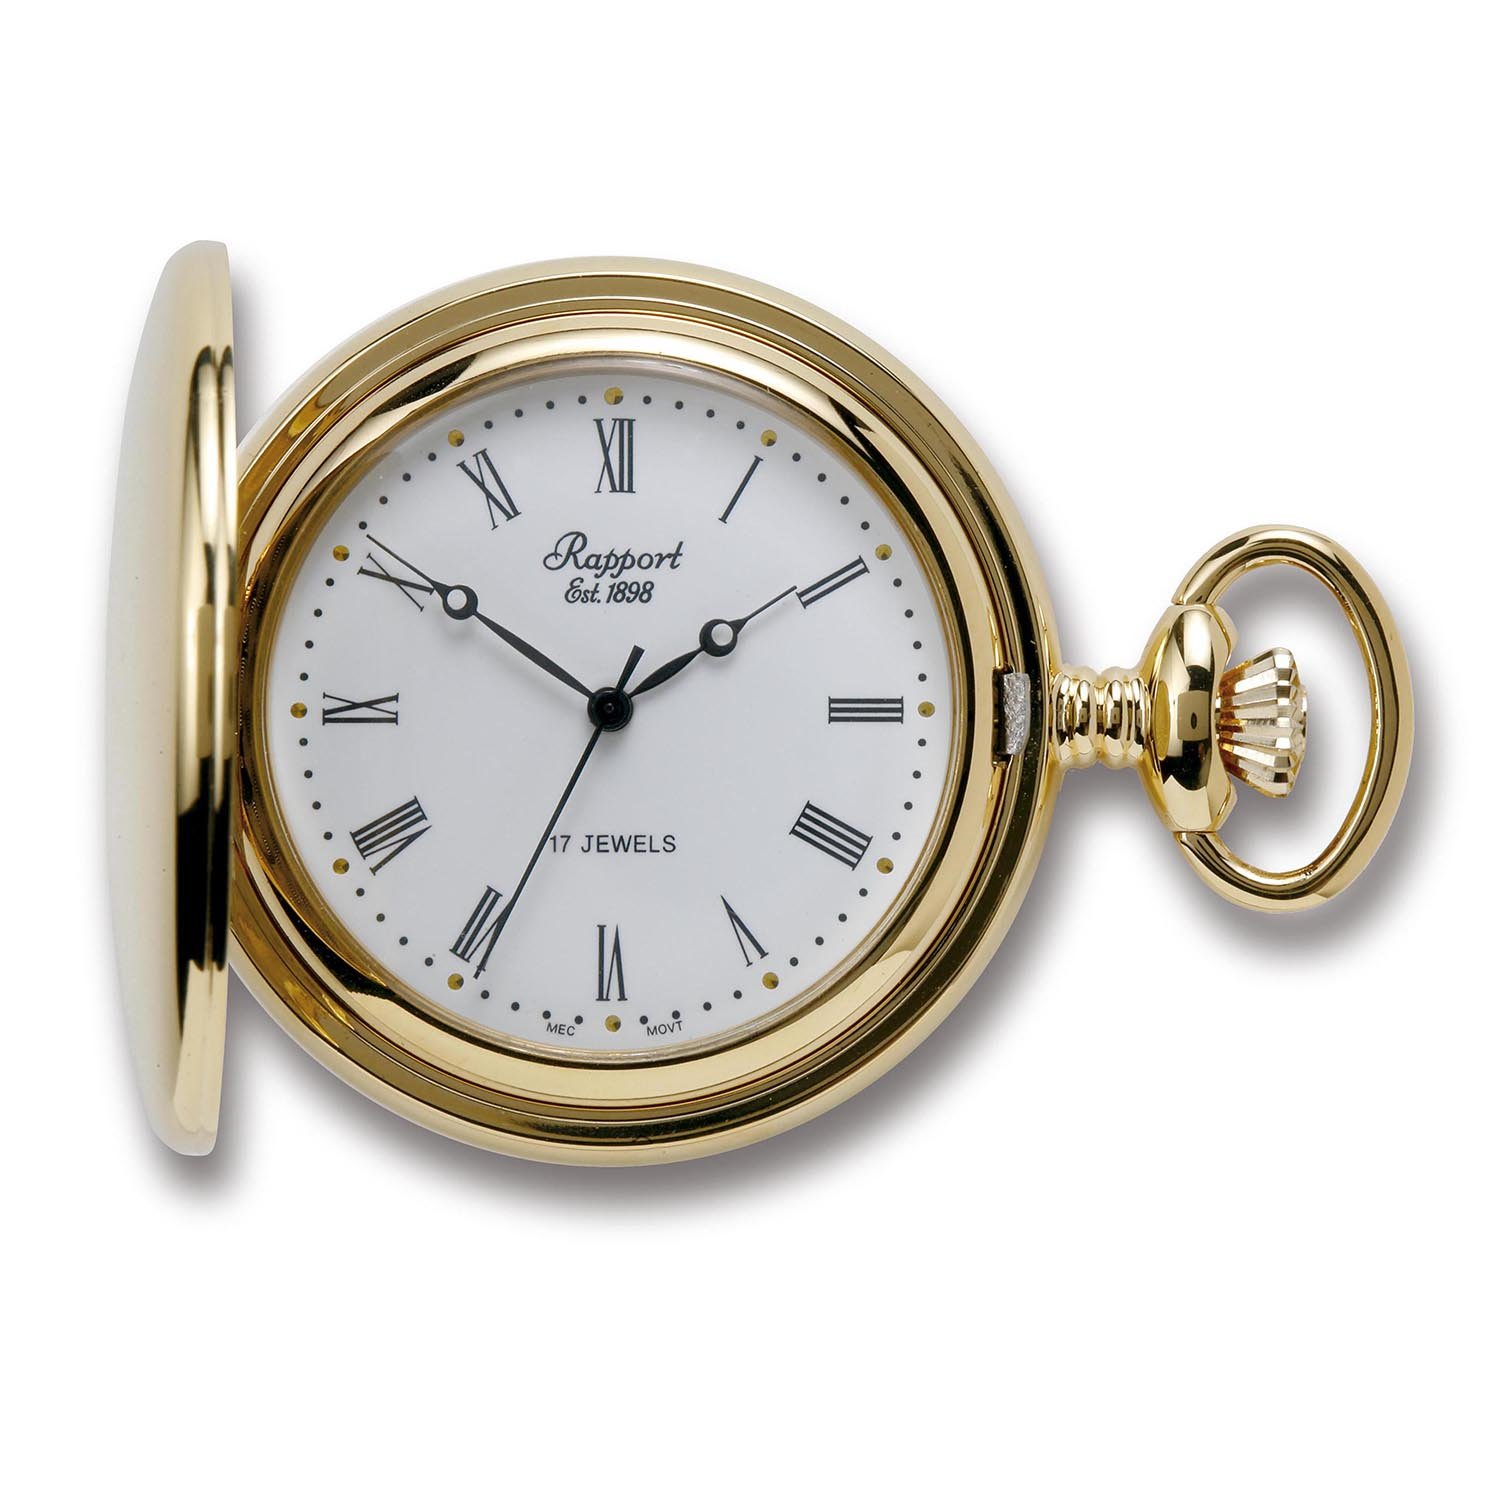 Rapport Vintage Pocket Watch with Chain Classic Oxford Hunter Case Pocket Watch